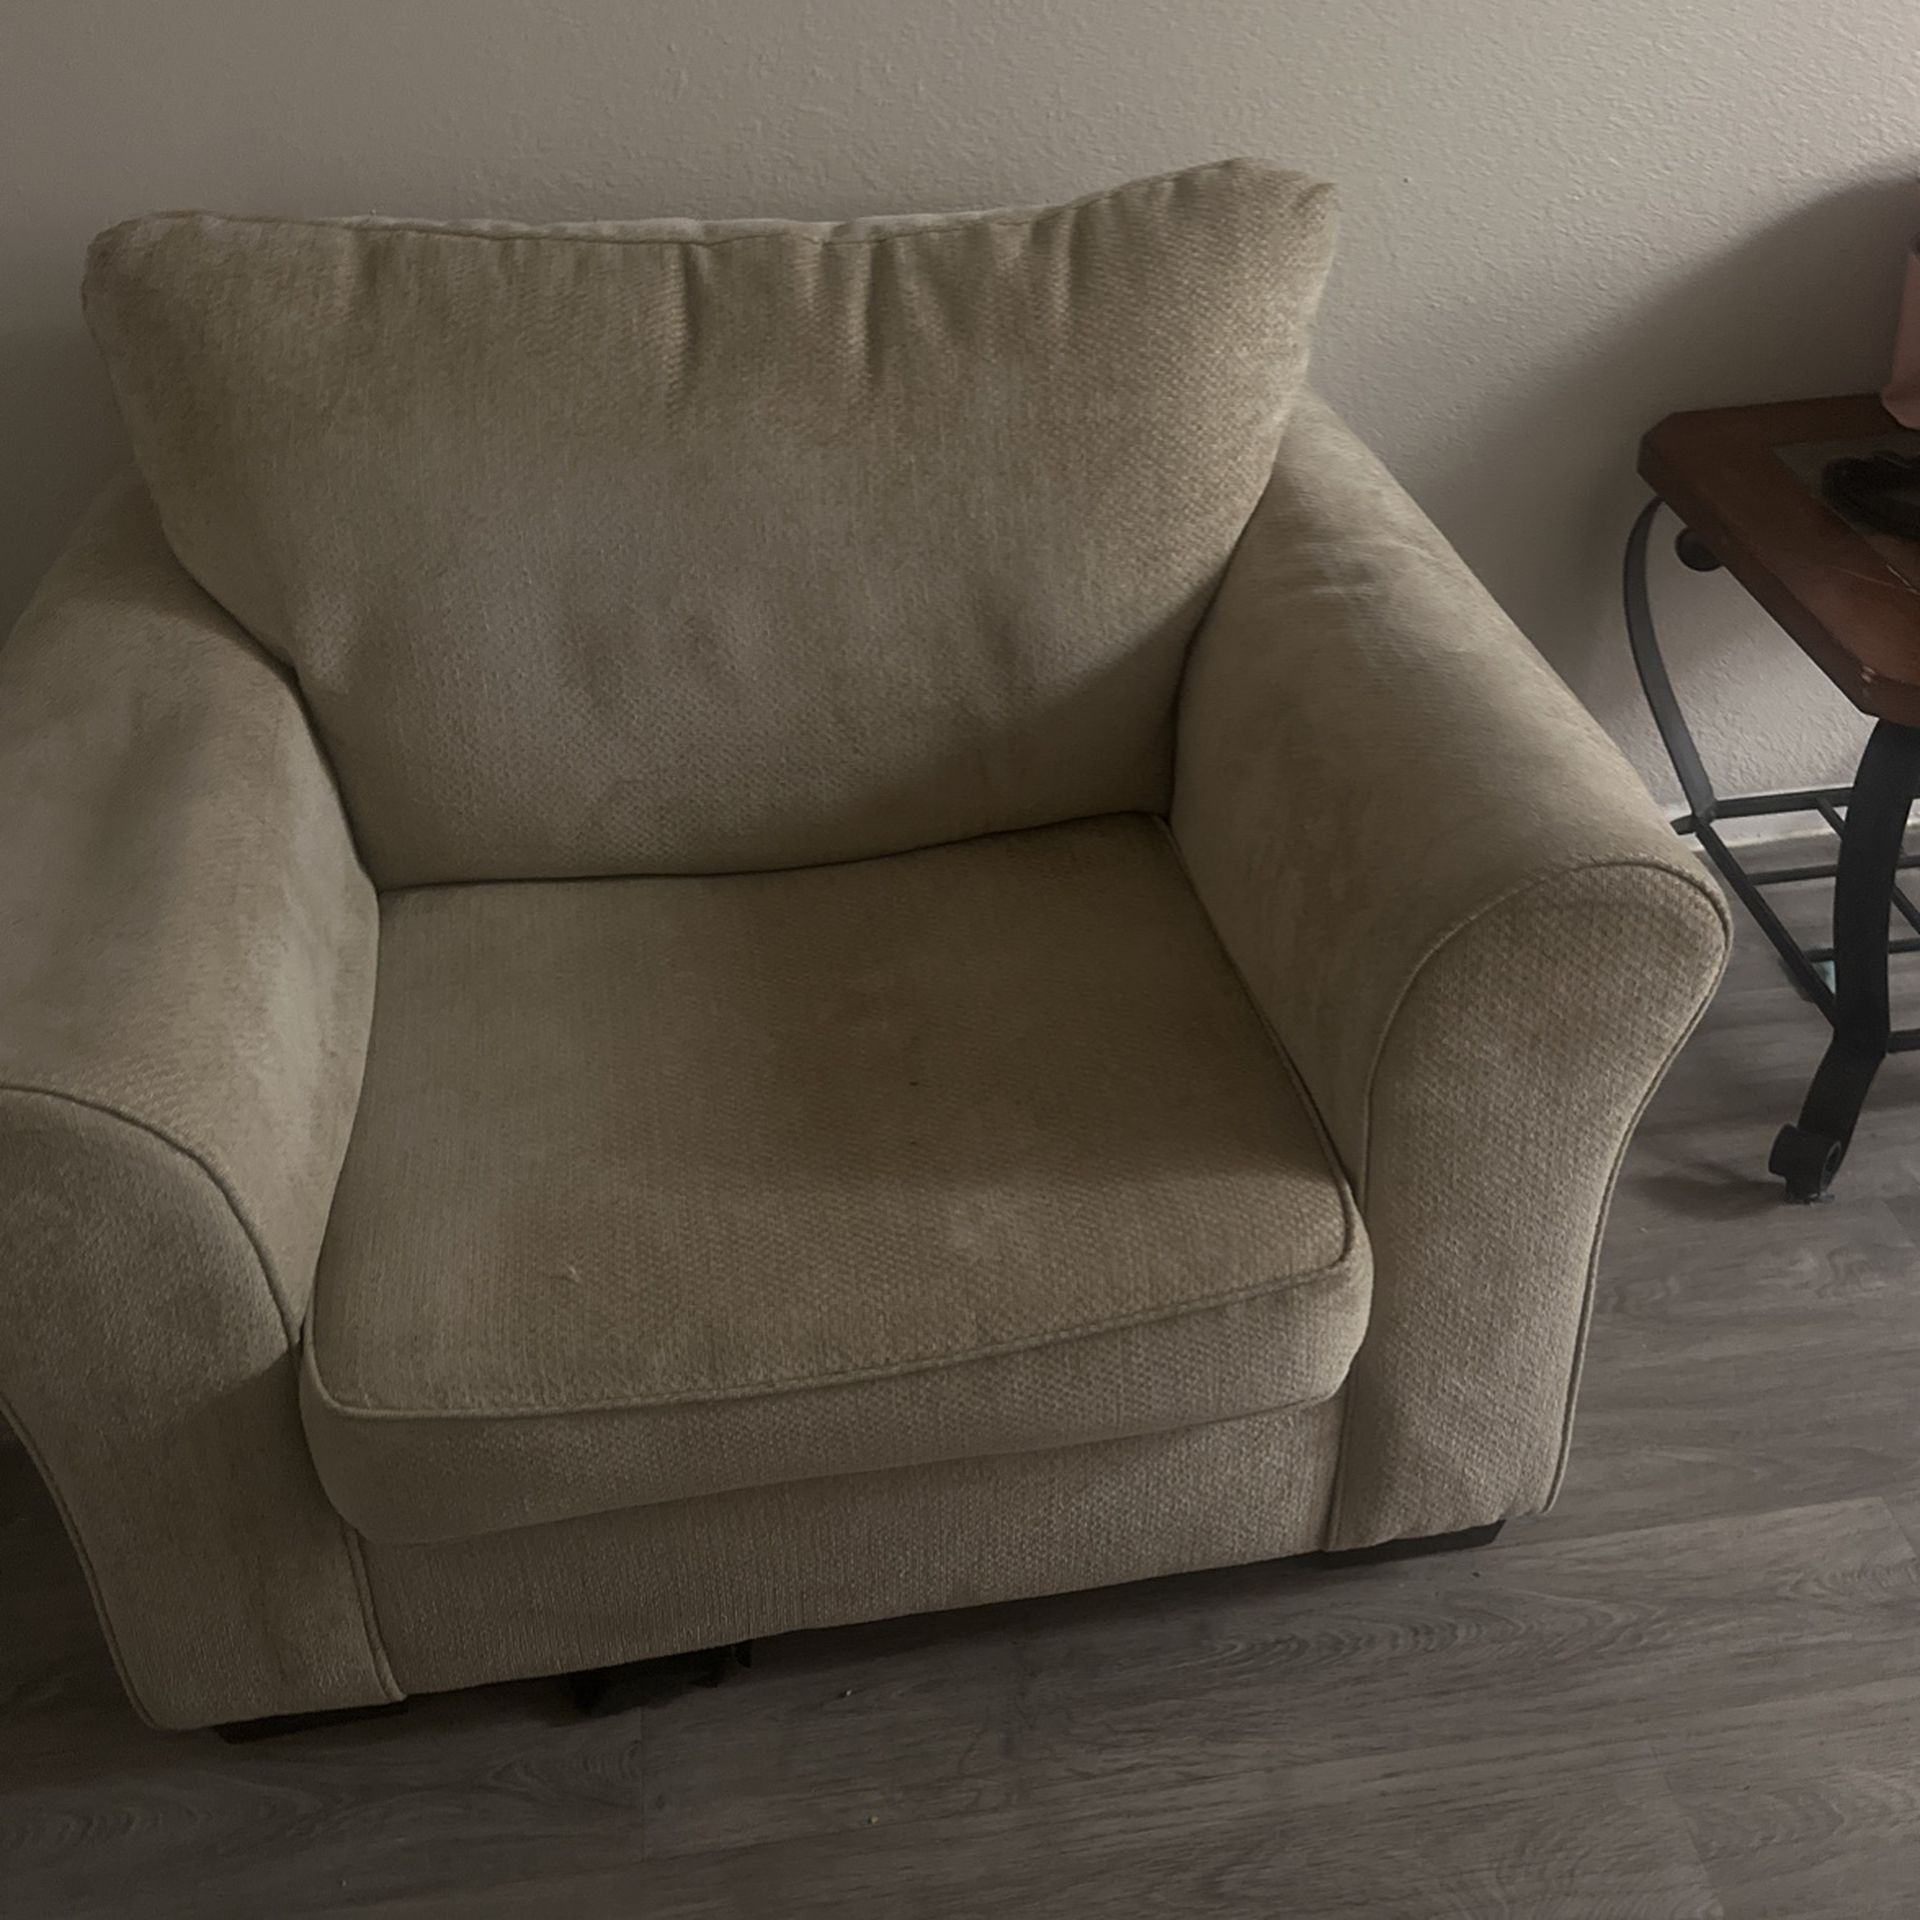 Couch, Chair, And End Table